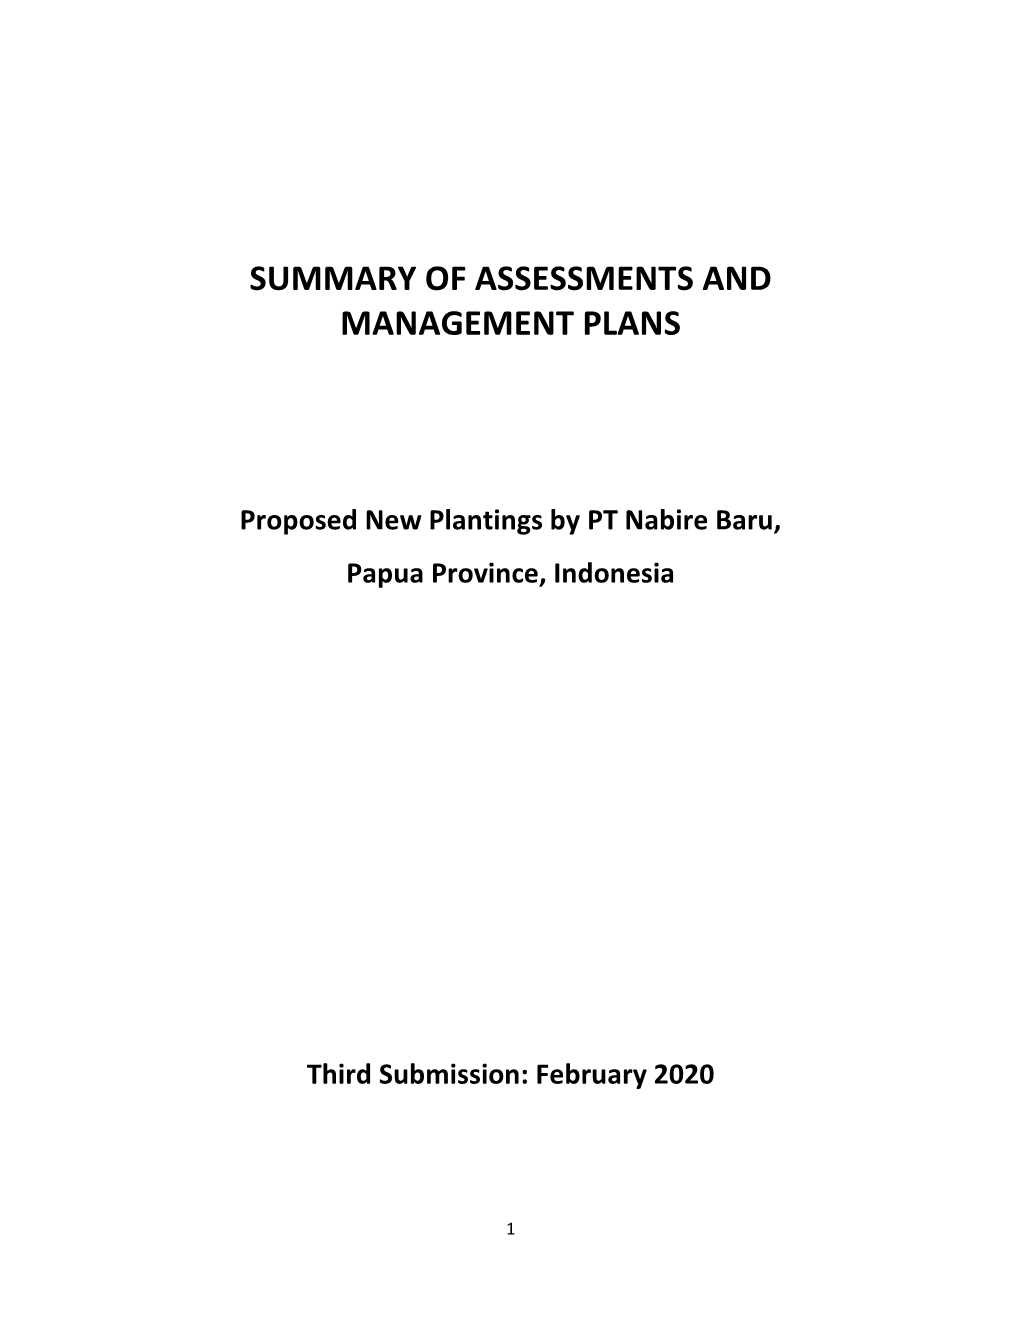 Summary of Assessments and Management Plans